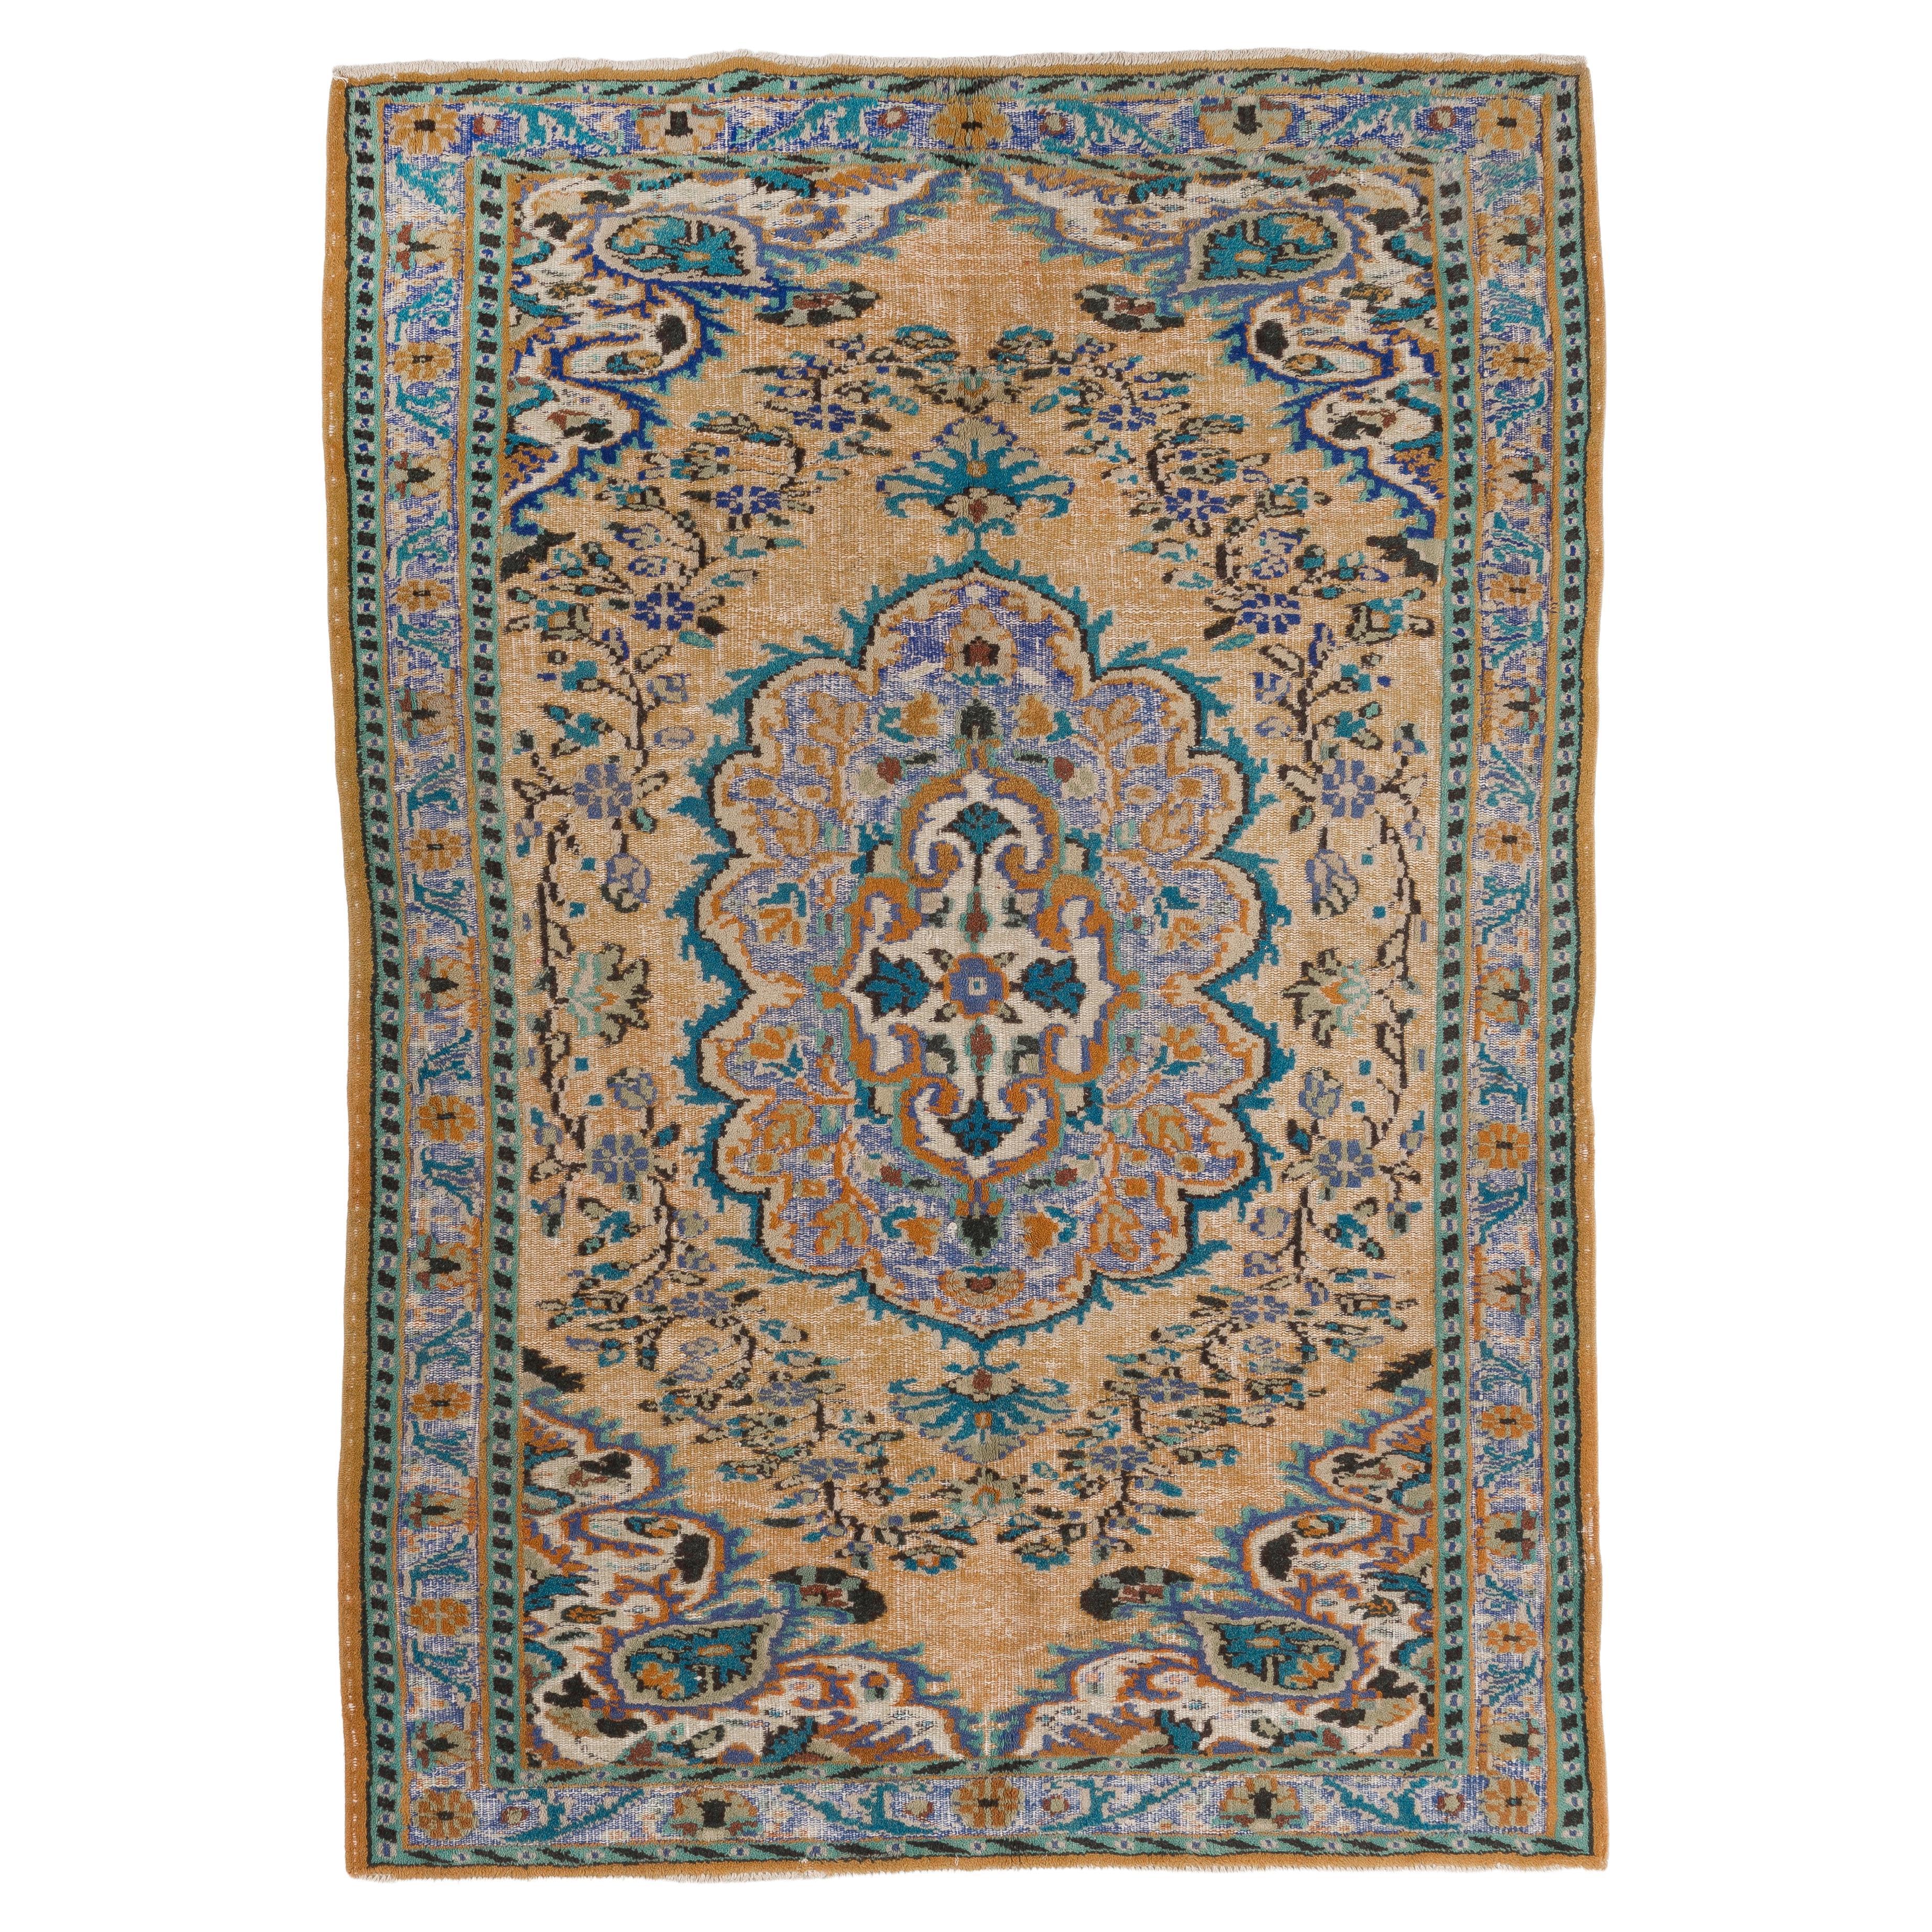 5.7x8 Ft Vintage Hand-Knotted Turkish High  Low Pile Rug with Medallion Design